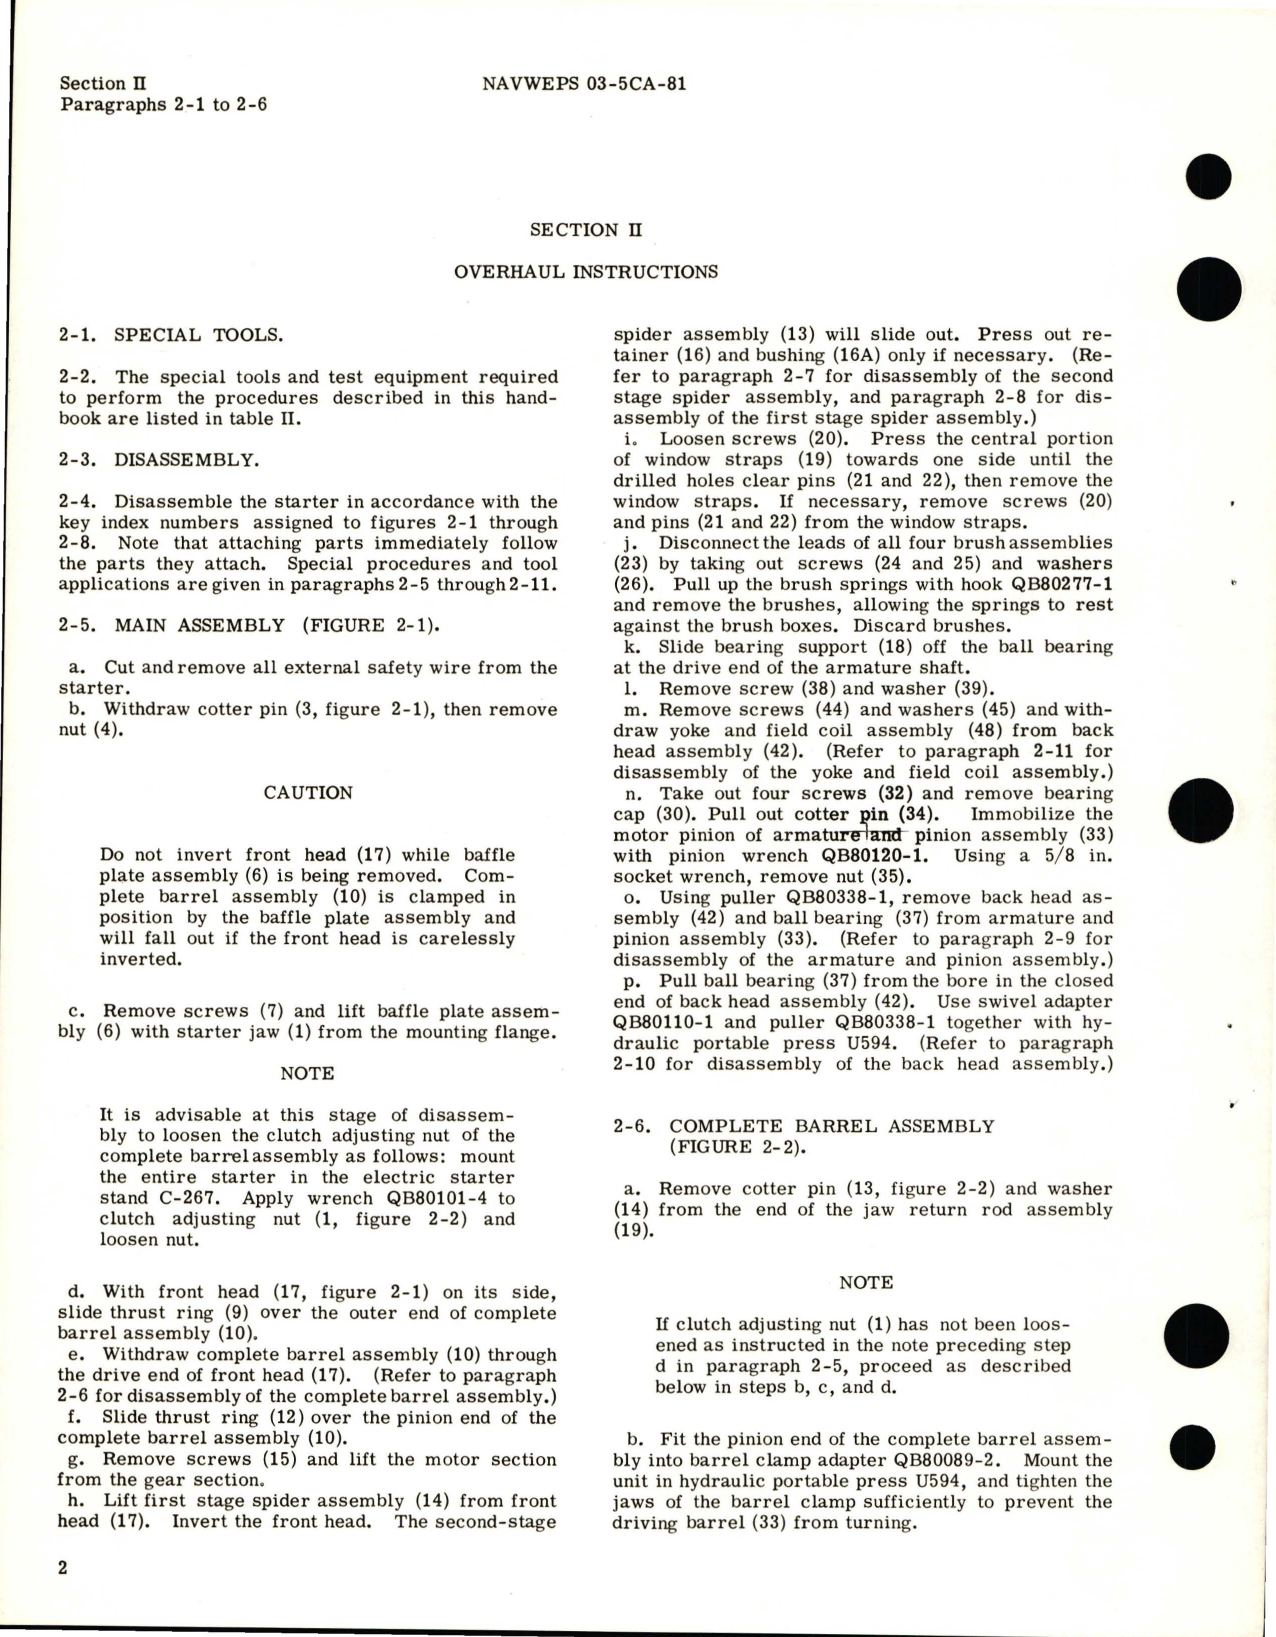 Sample page 8 from AirCorps Library document: Overhaul Instructions for Direct-Cranking Electric Starter 